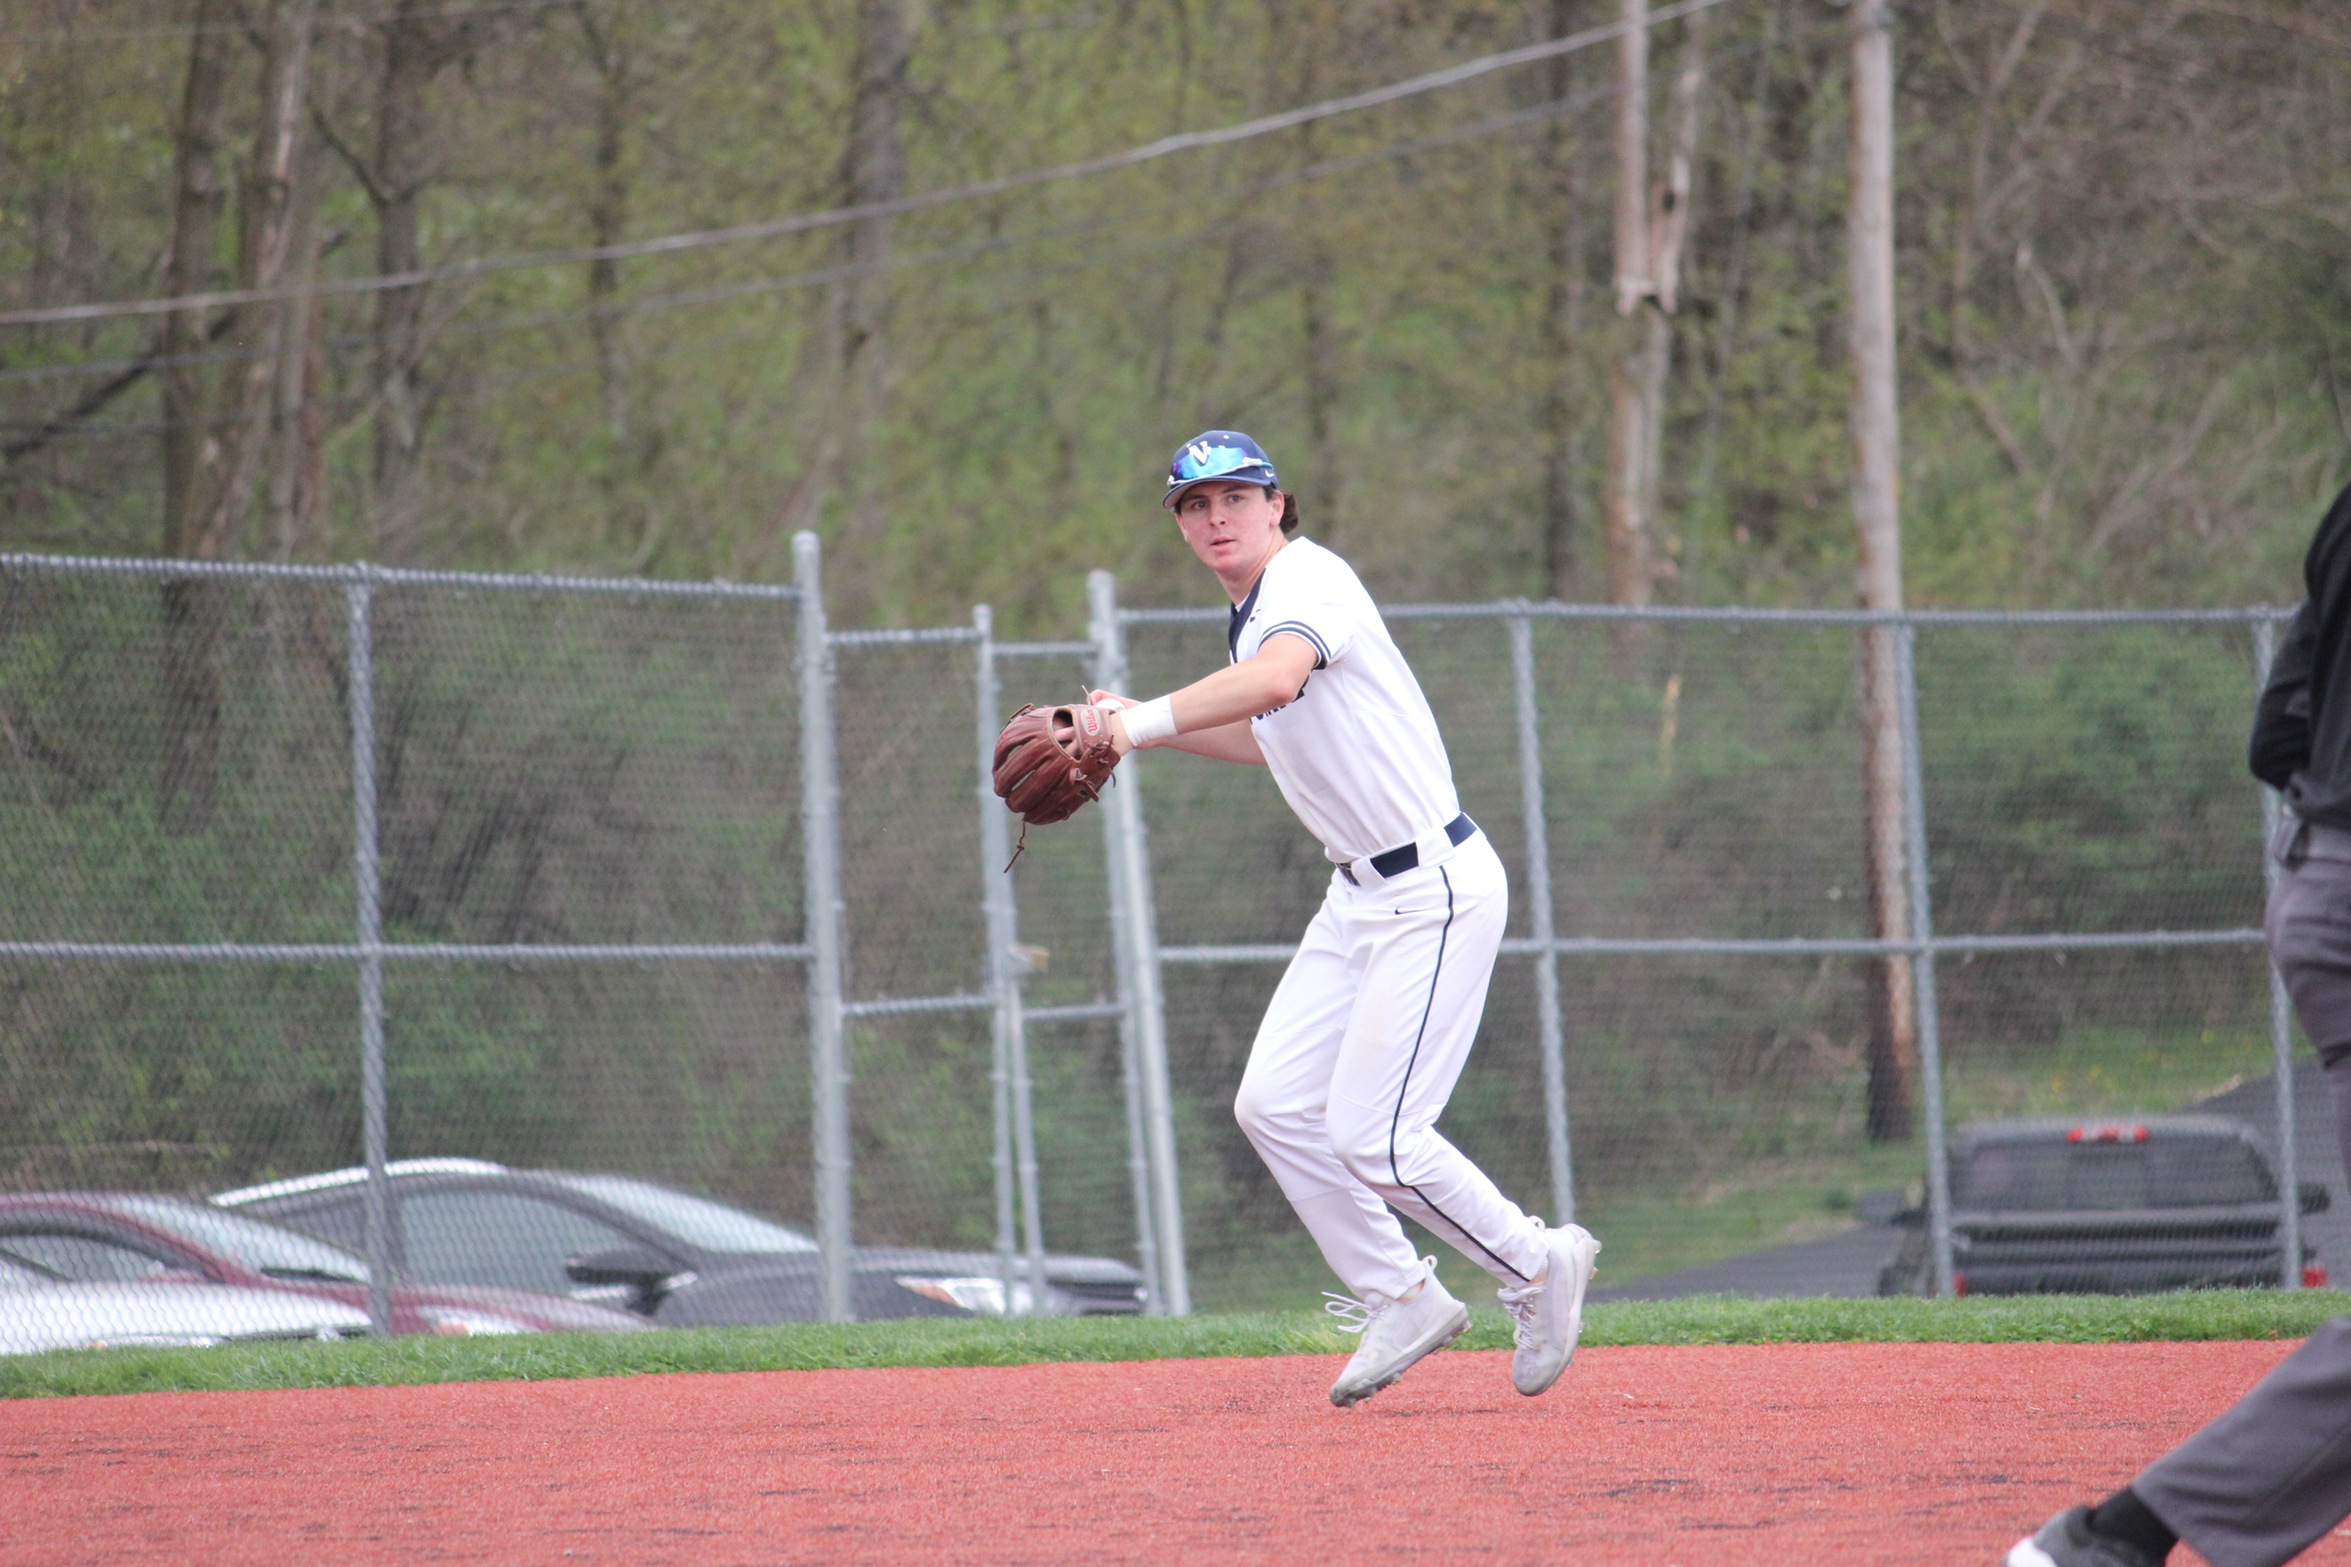 Sonntag with a throw from third base.